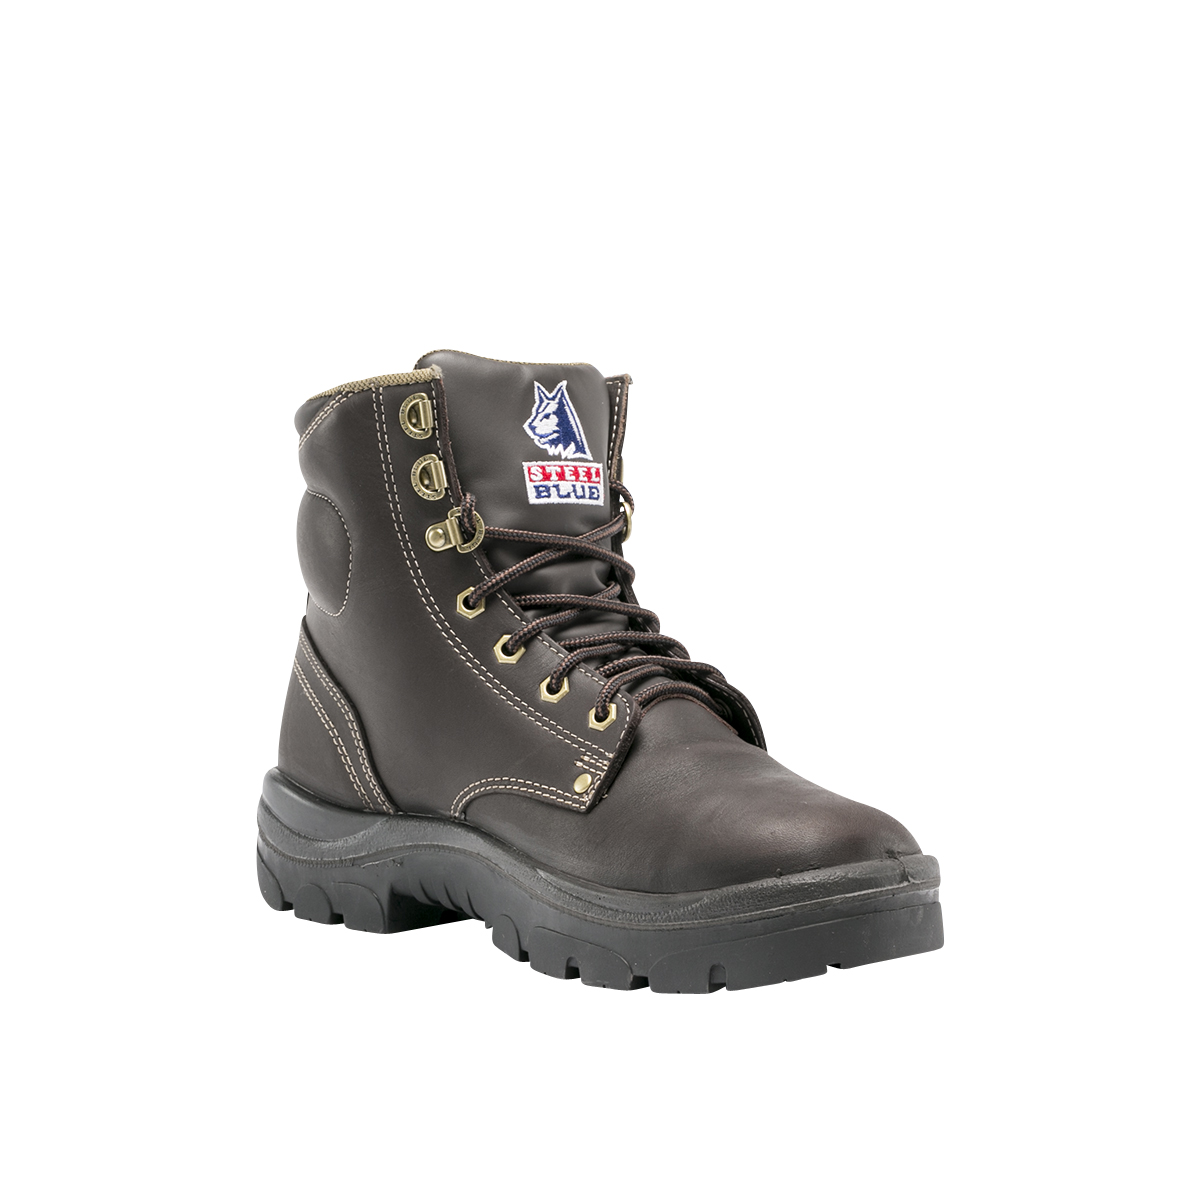 SAFETY BOOT ARGYLE WHISKEY S10 -ANKLE LACE UP